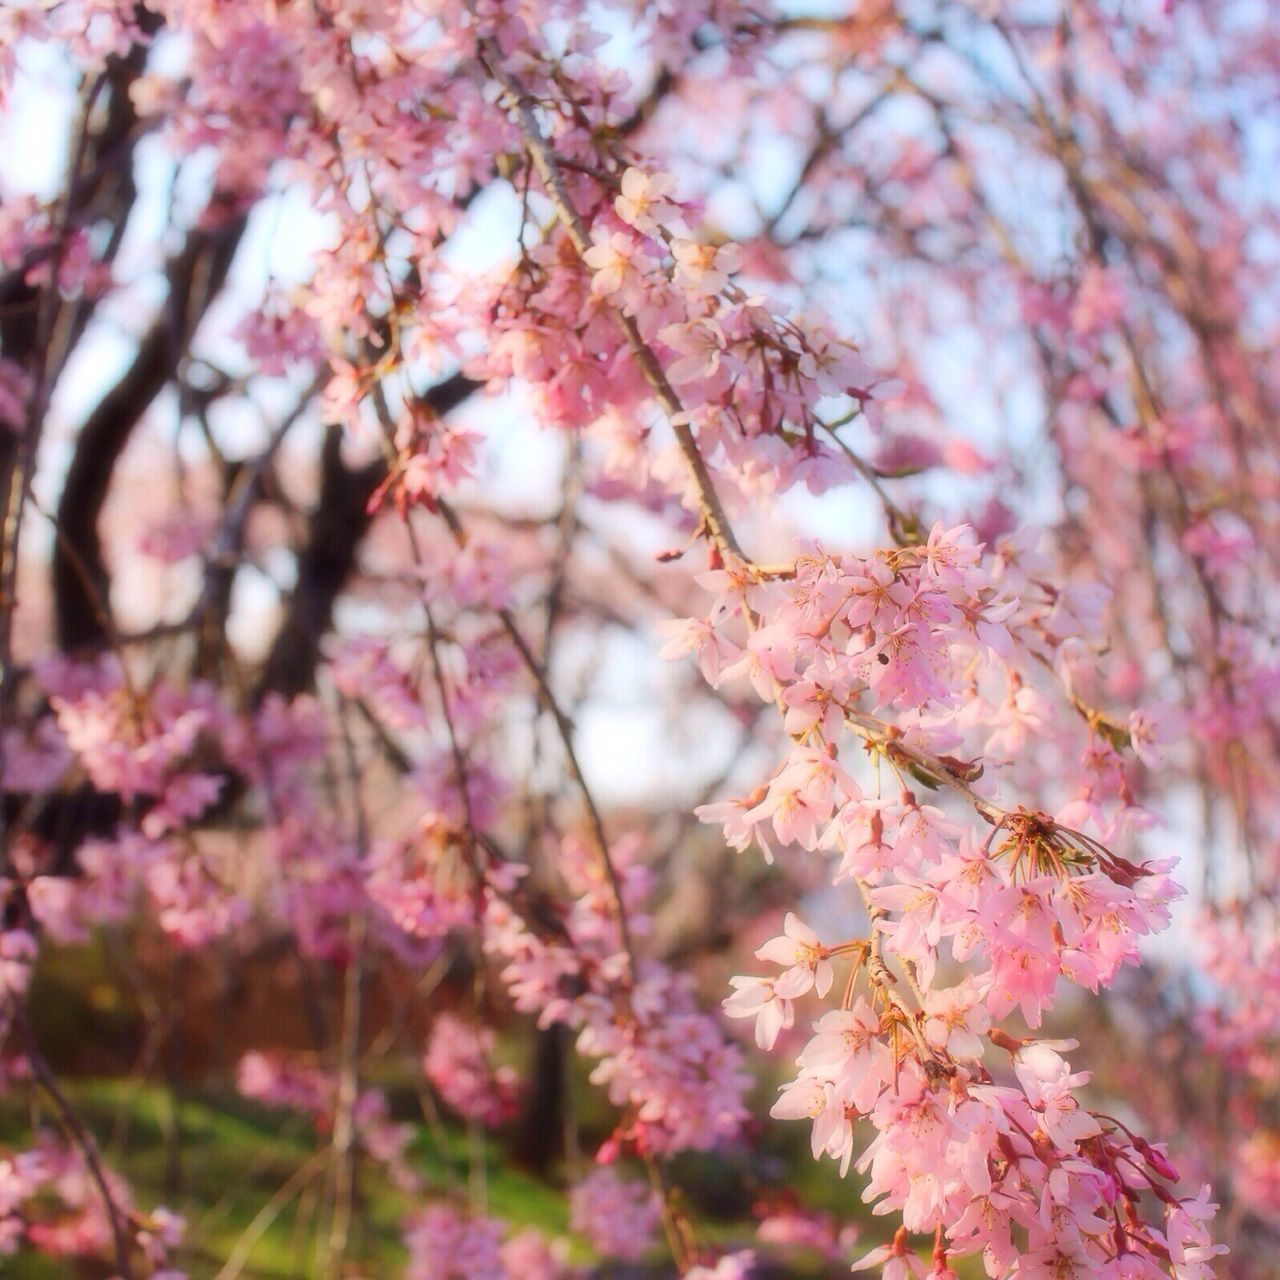 flower, freshness, tree, branch, pink color, growth, beauty in nature, fragility, cherry blossom, nature, blossom, cherry tree, focus on foreground, pink, blooming, springtime, in bloom, close-up, petal, low angle view